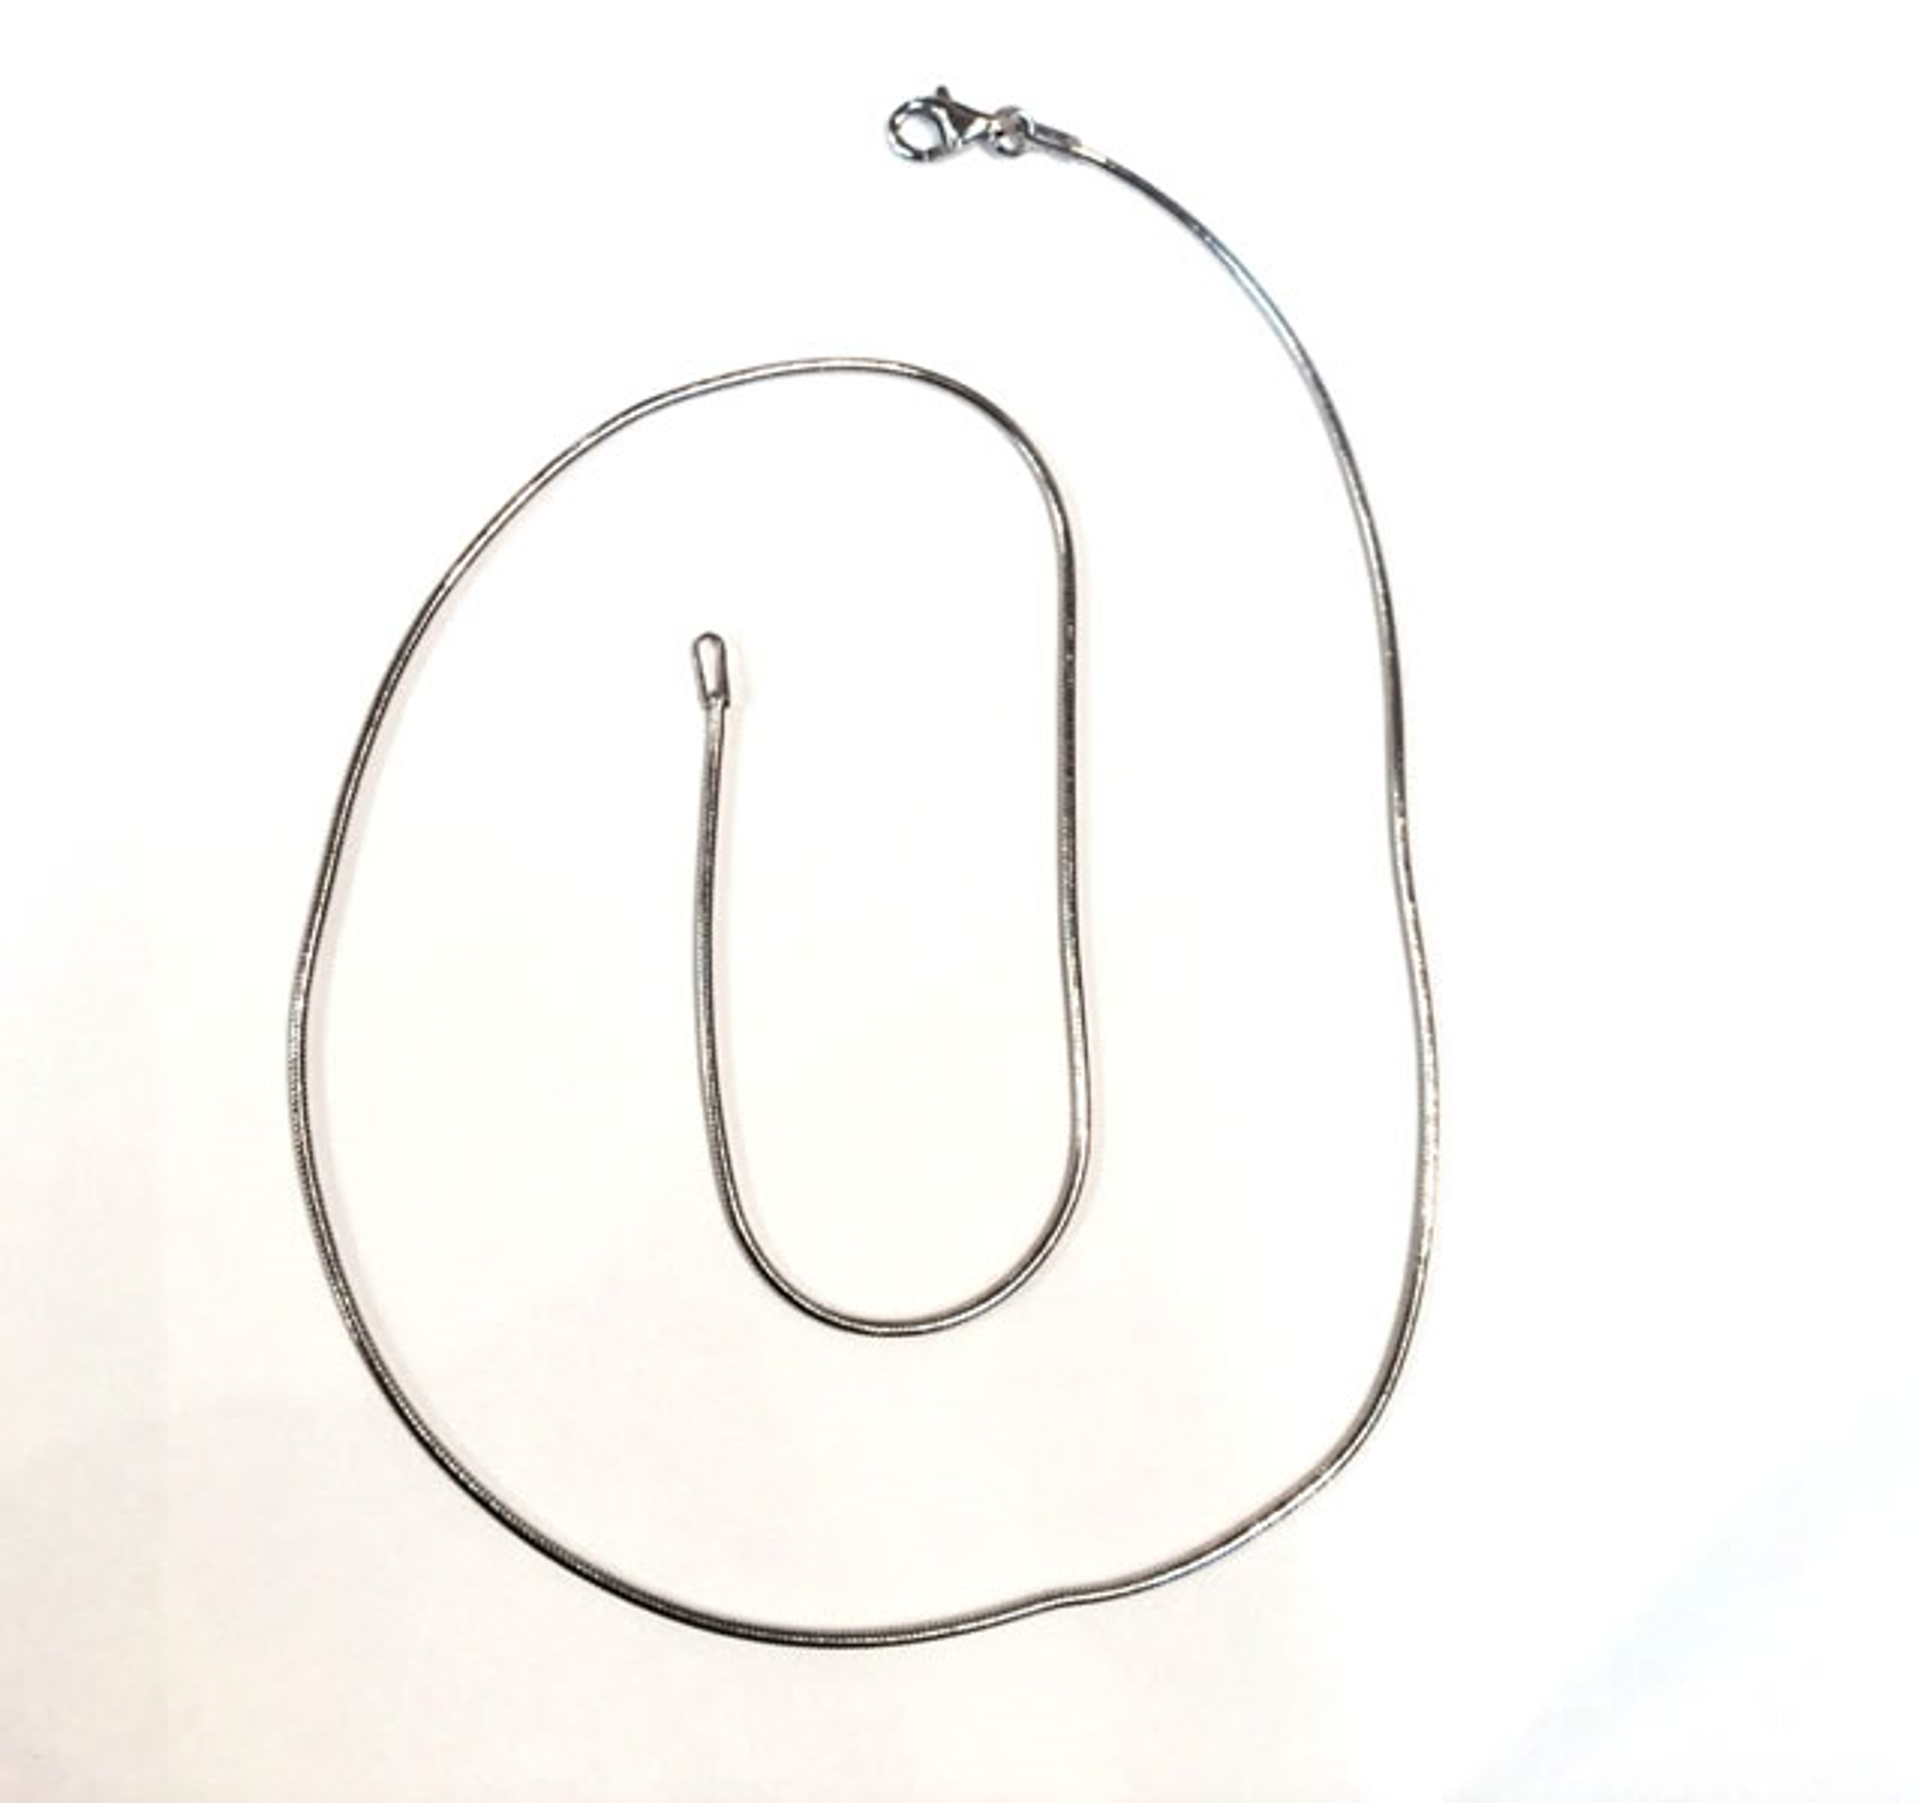 Necklace - 20" Sterling Silver Chain by Joryel Vera